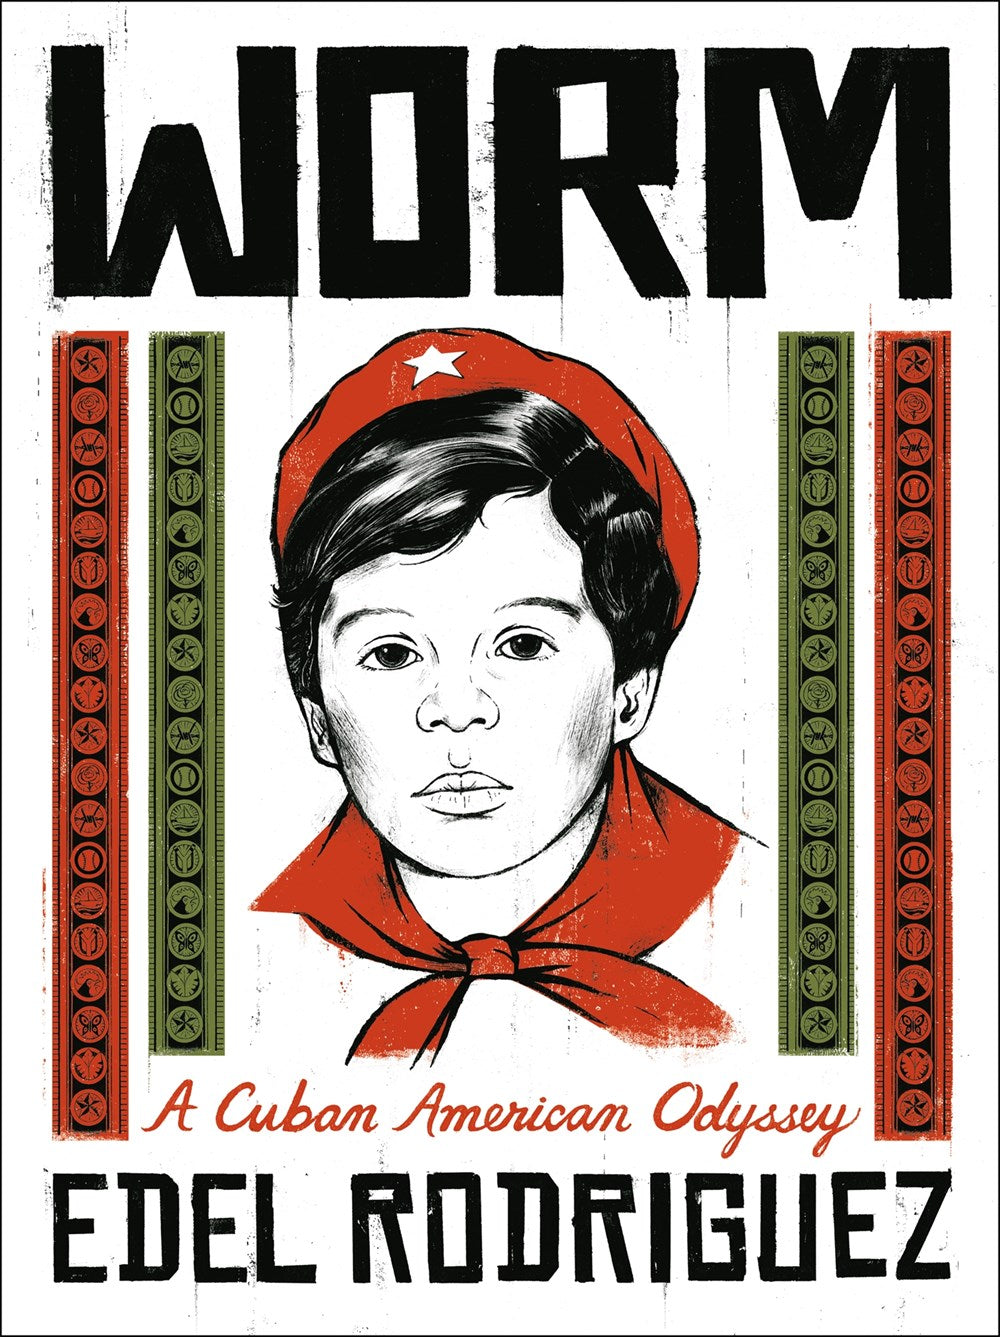 WORM: A Cuban American Odyssey by Edel Rodriguez (Hardcover) (PREORDER)